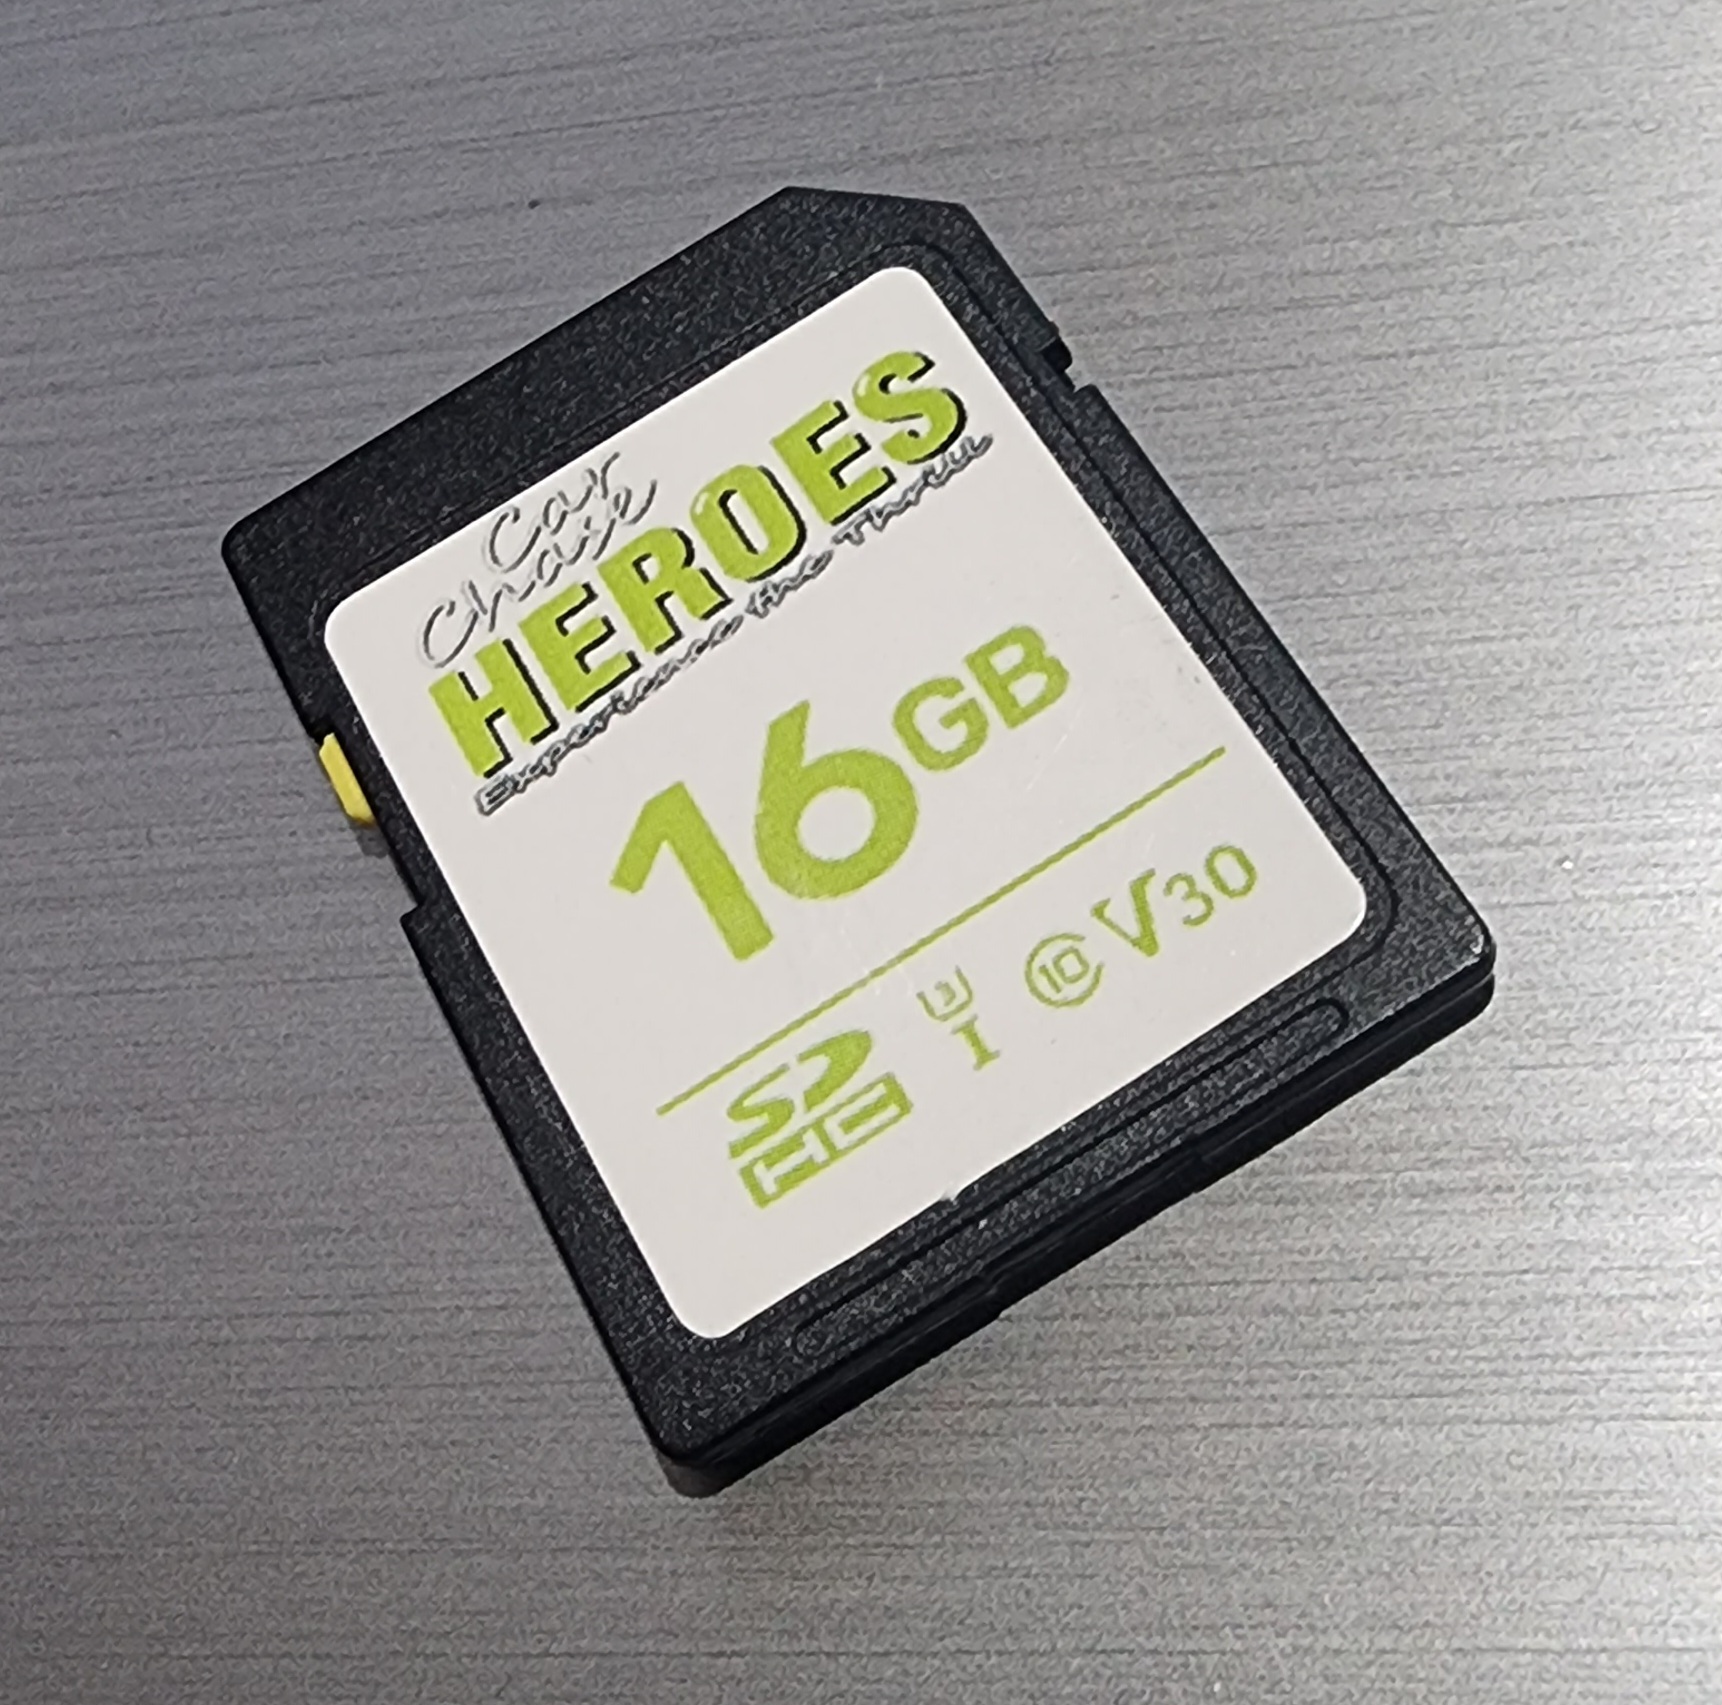 16GB CCH Full size SD card